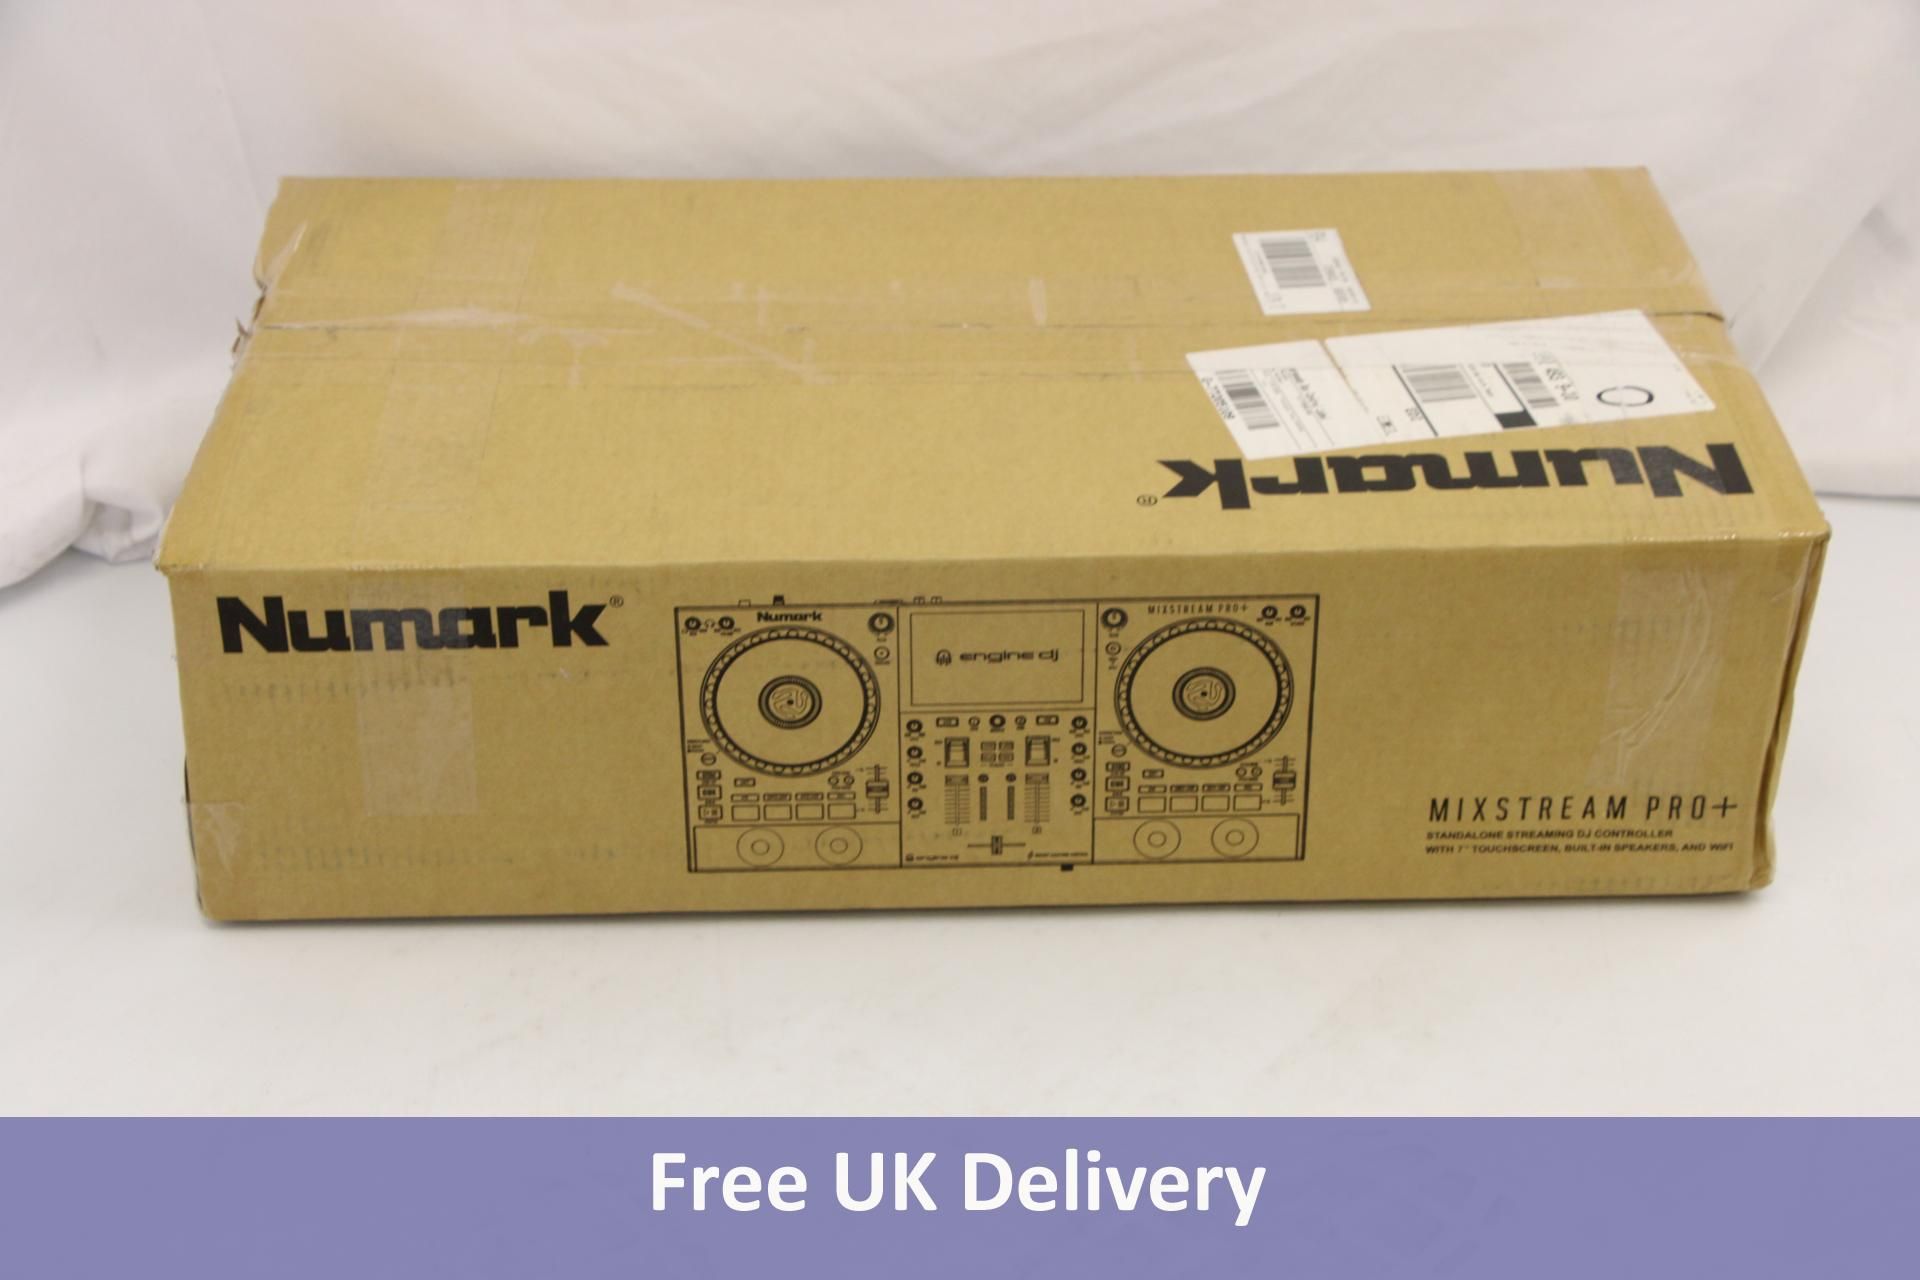 Numark Mixstream Pro+ Streaming DJ Controller with Touchscreen and Built-In Speakers